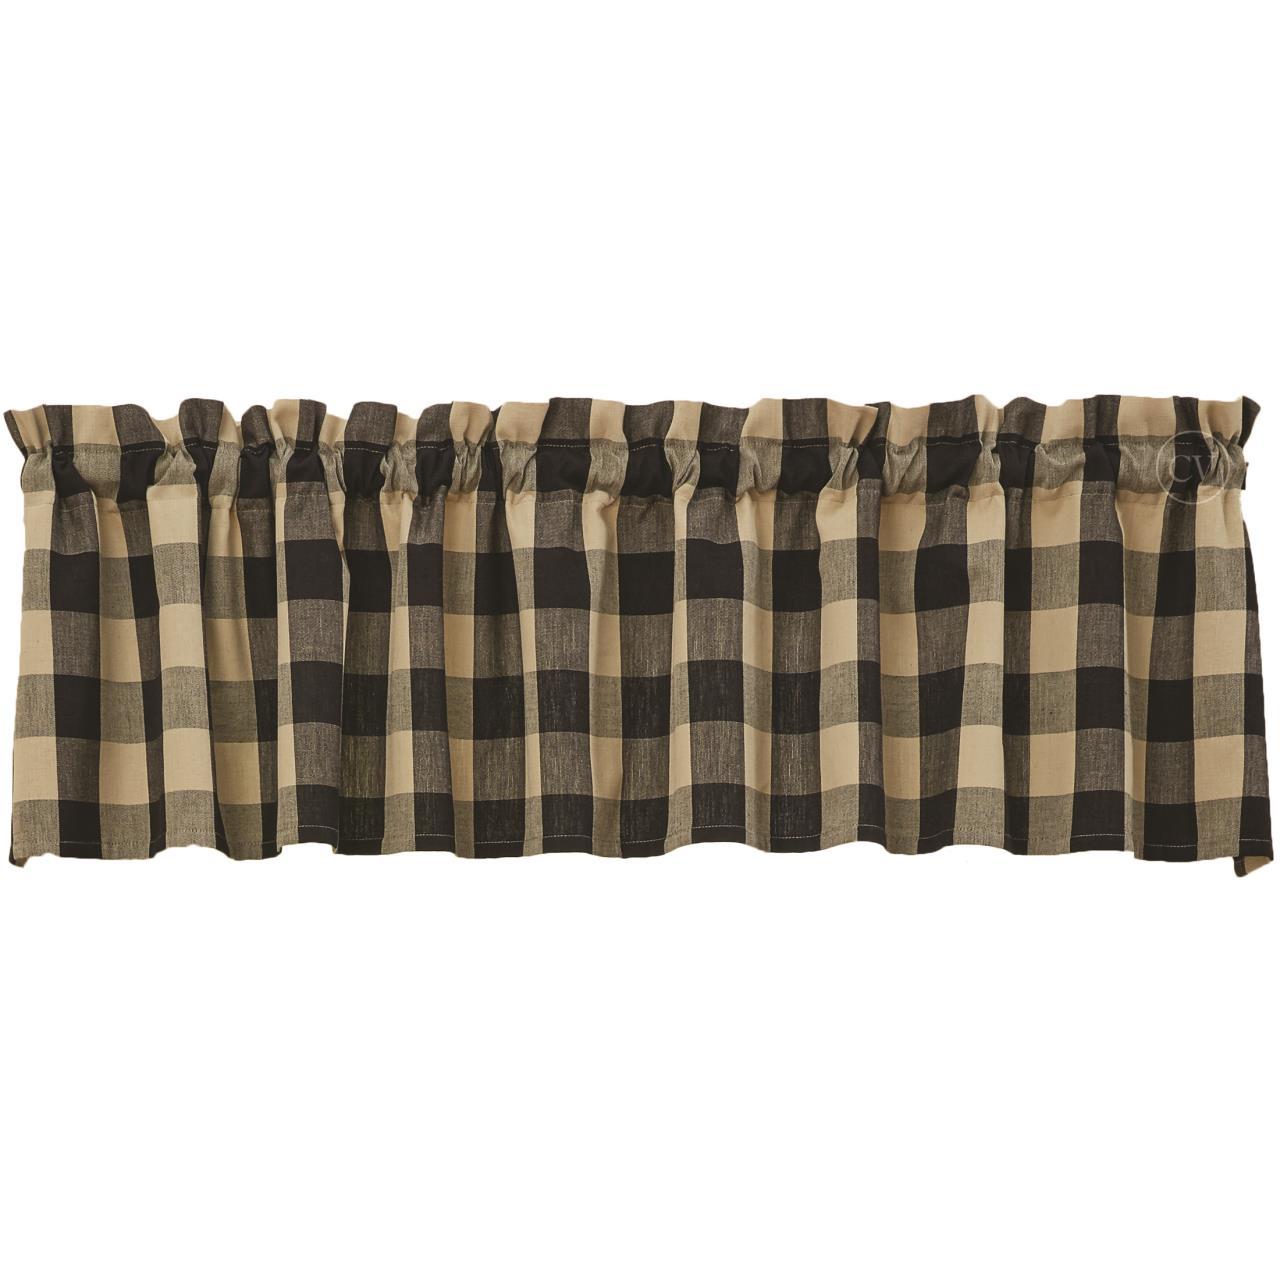 Park Designs - Tavern Check Valance - 3 Colors Black, Navy, Moss 72 x 14 Inches